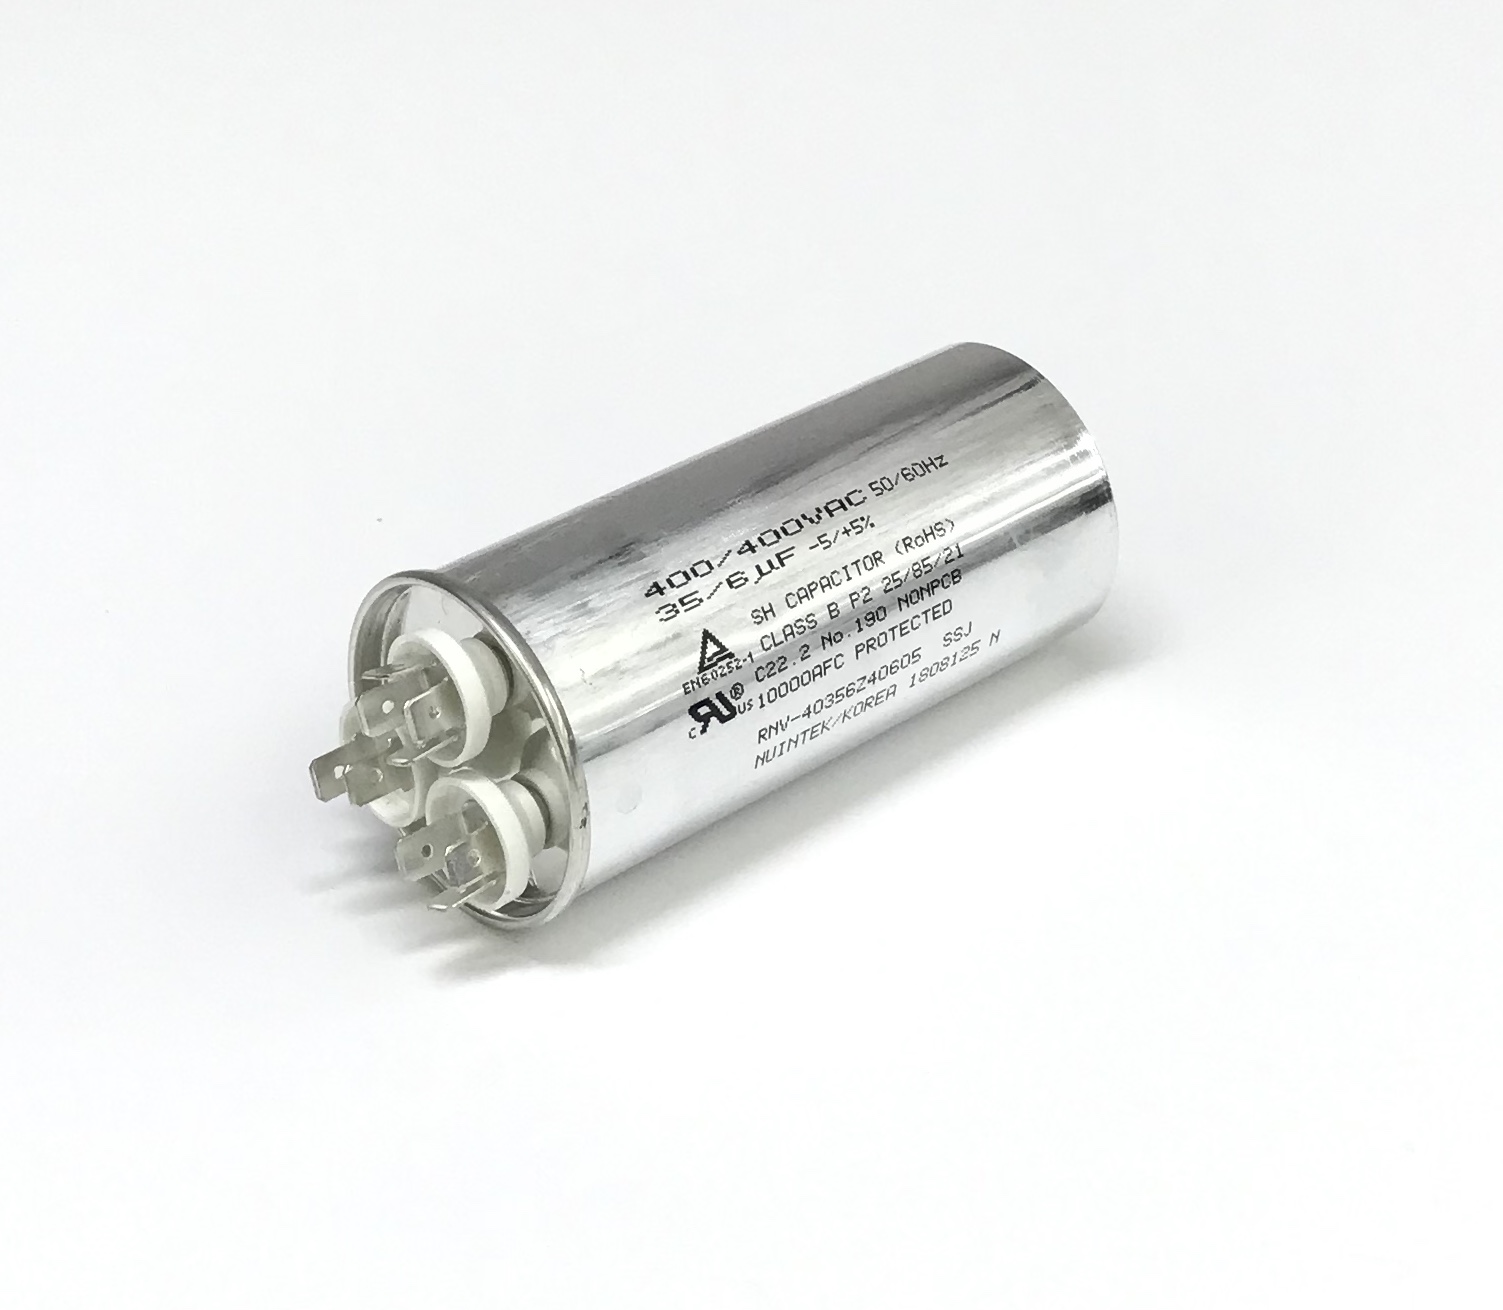 LG OEM LG Air Conditioner AC Capacitor Shipped With WG1805RY6, WR1820, WR-1820